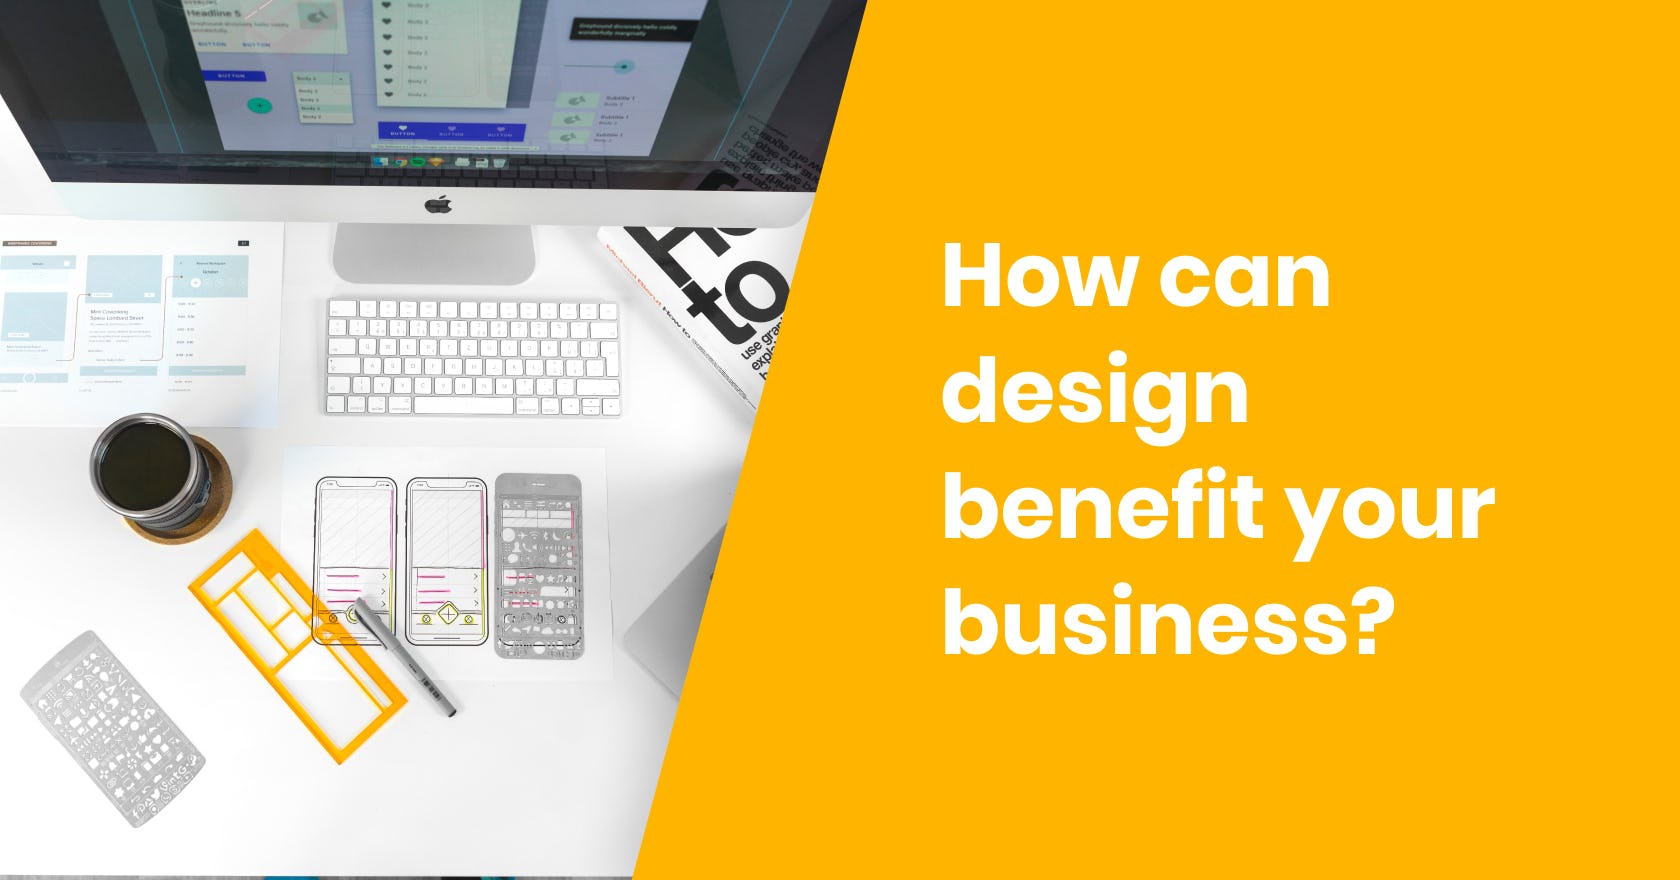 Nightborn - How can design benefit your business?